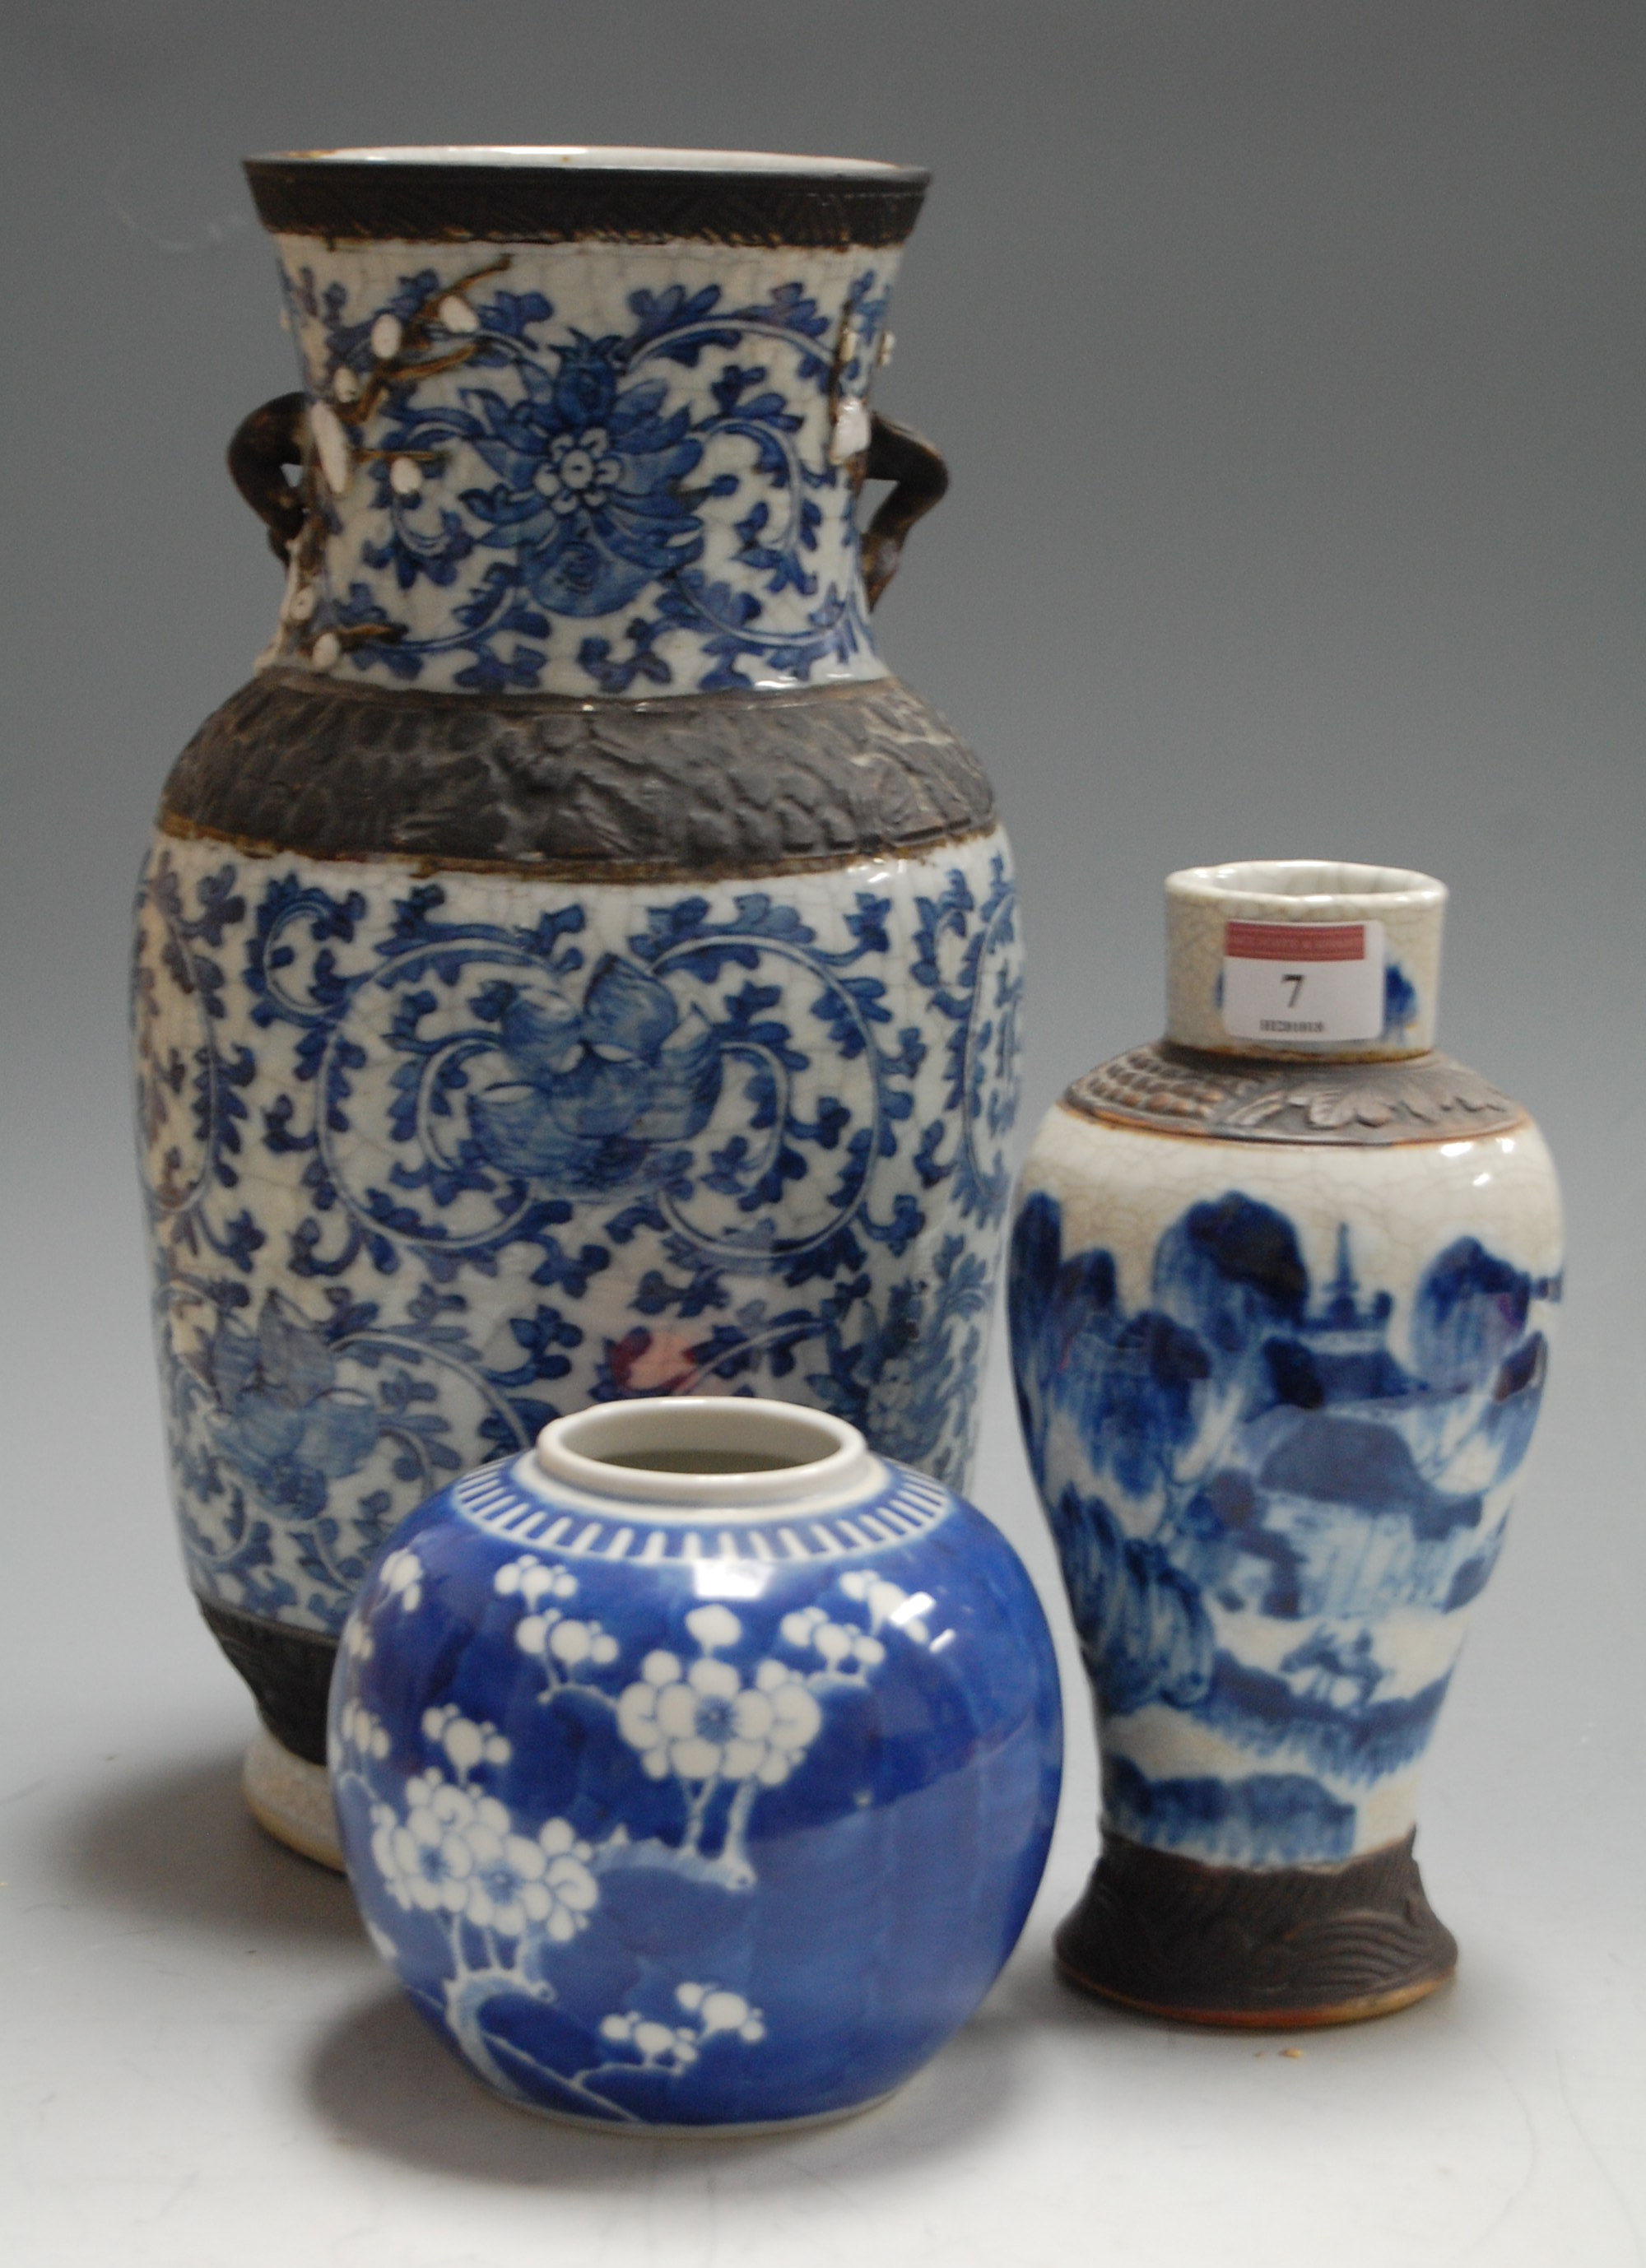 An early 20th century Japanese crackle glaze blue and white vase, of baluster form, having bronzed